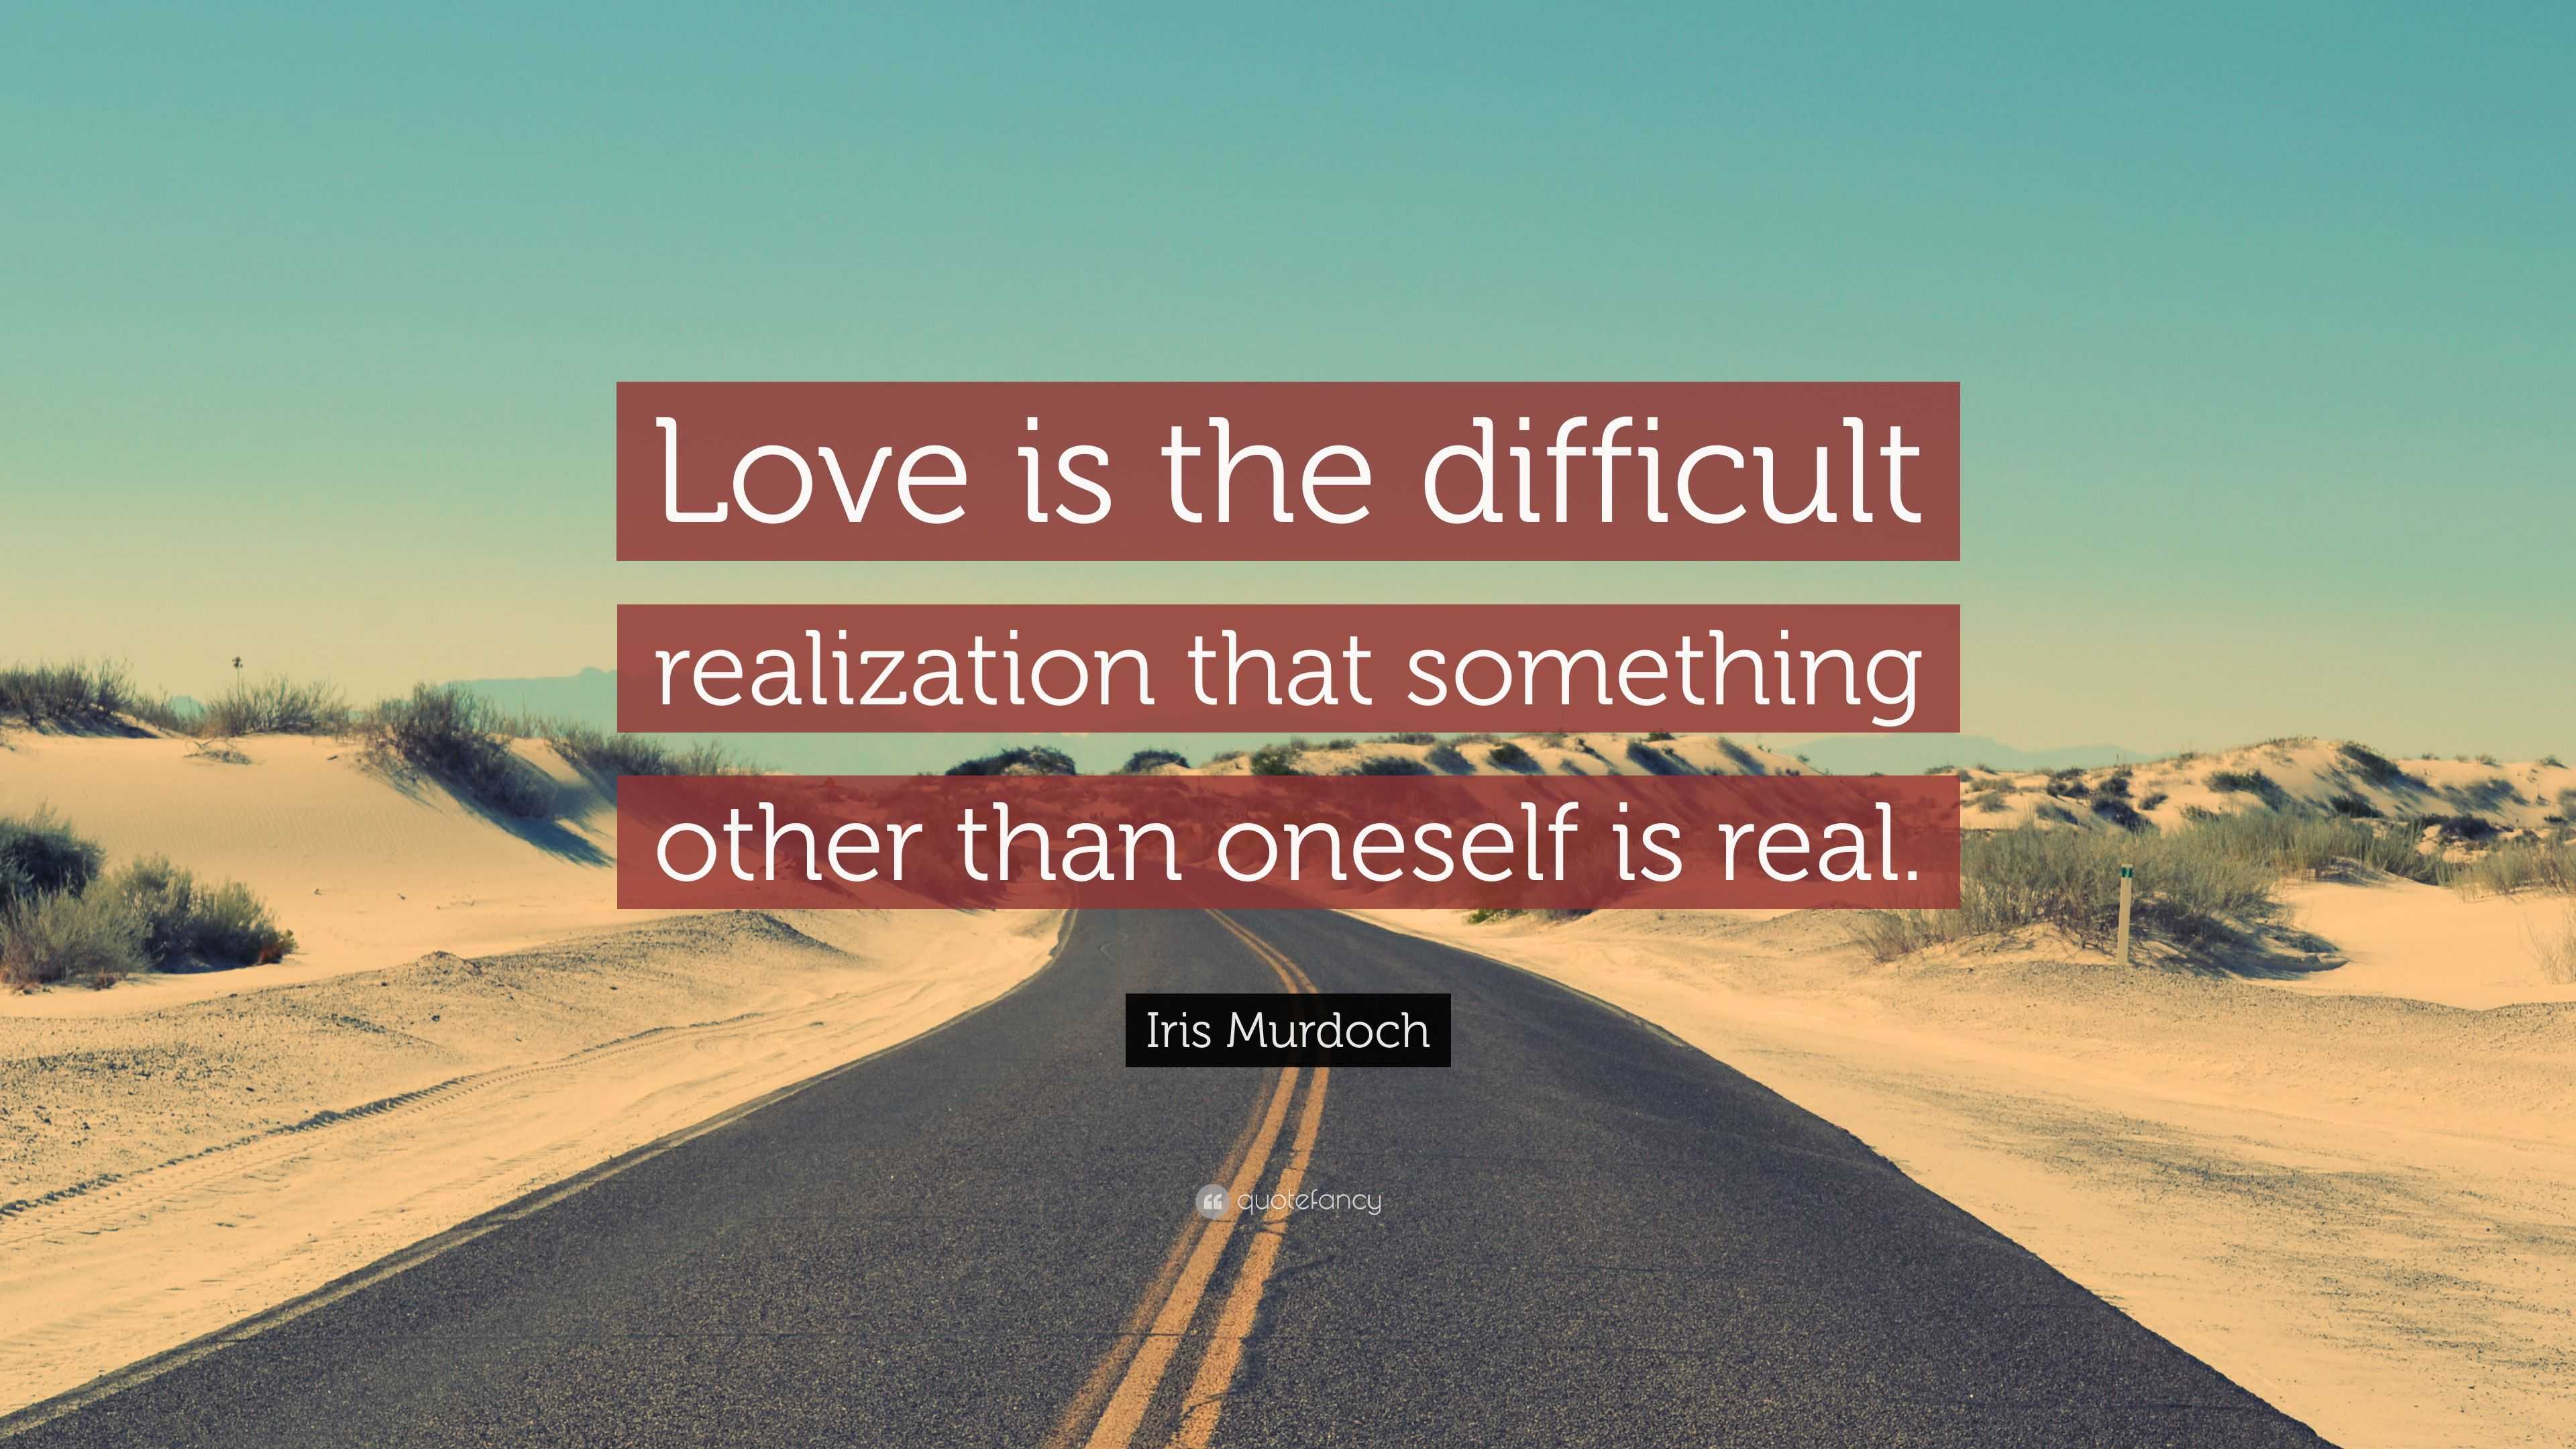 Iris Murdoch Quote: “Love is the difficult realization that something ...